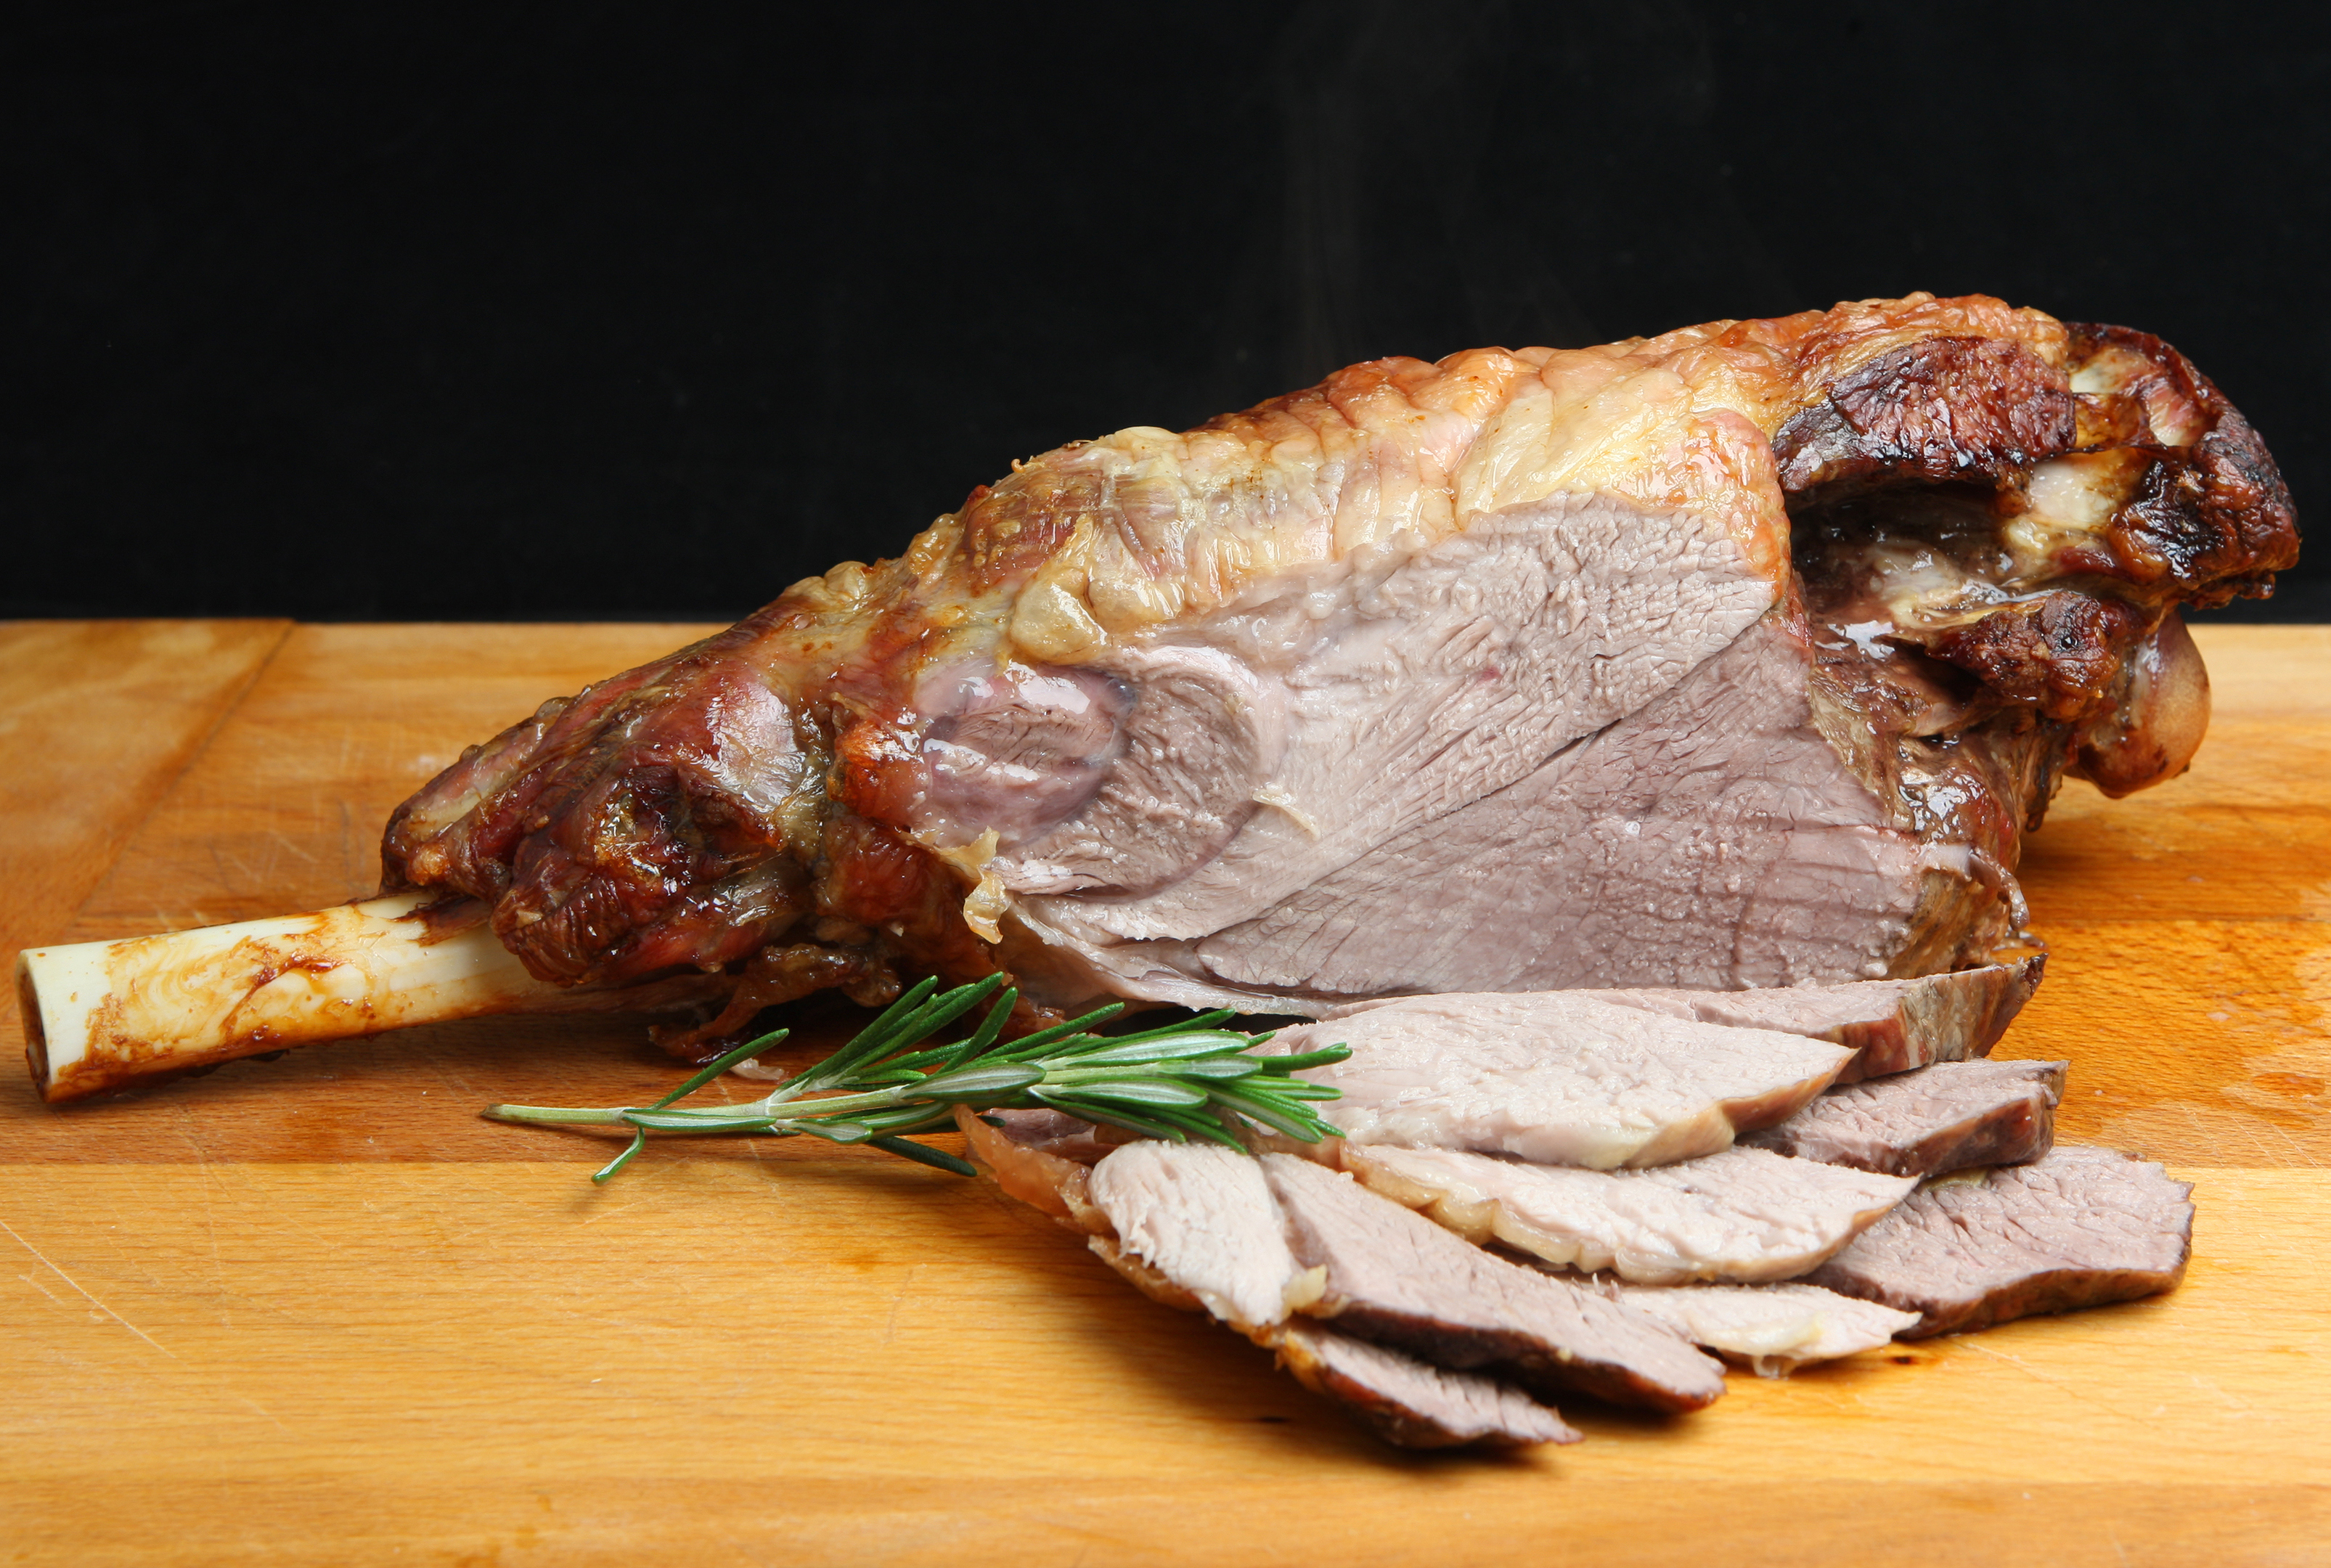 The sheep industry relies on a peak in lamb consumption at Easter